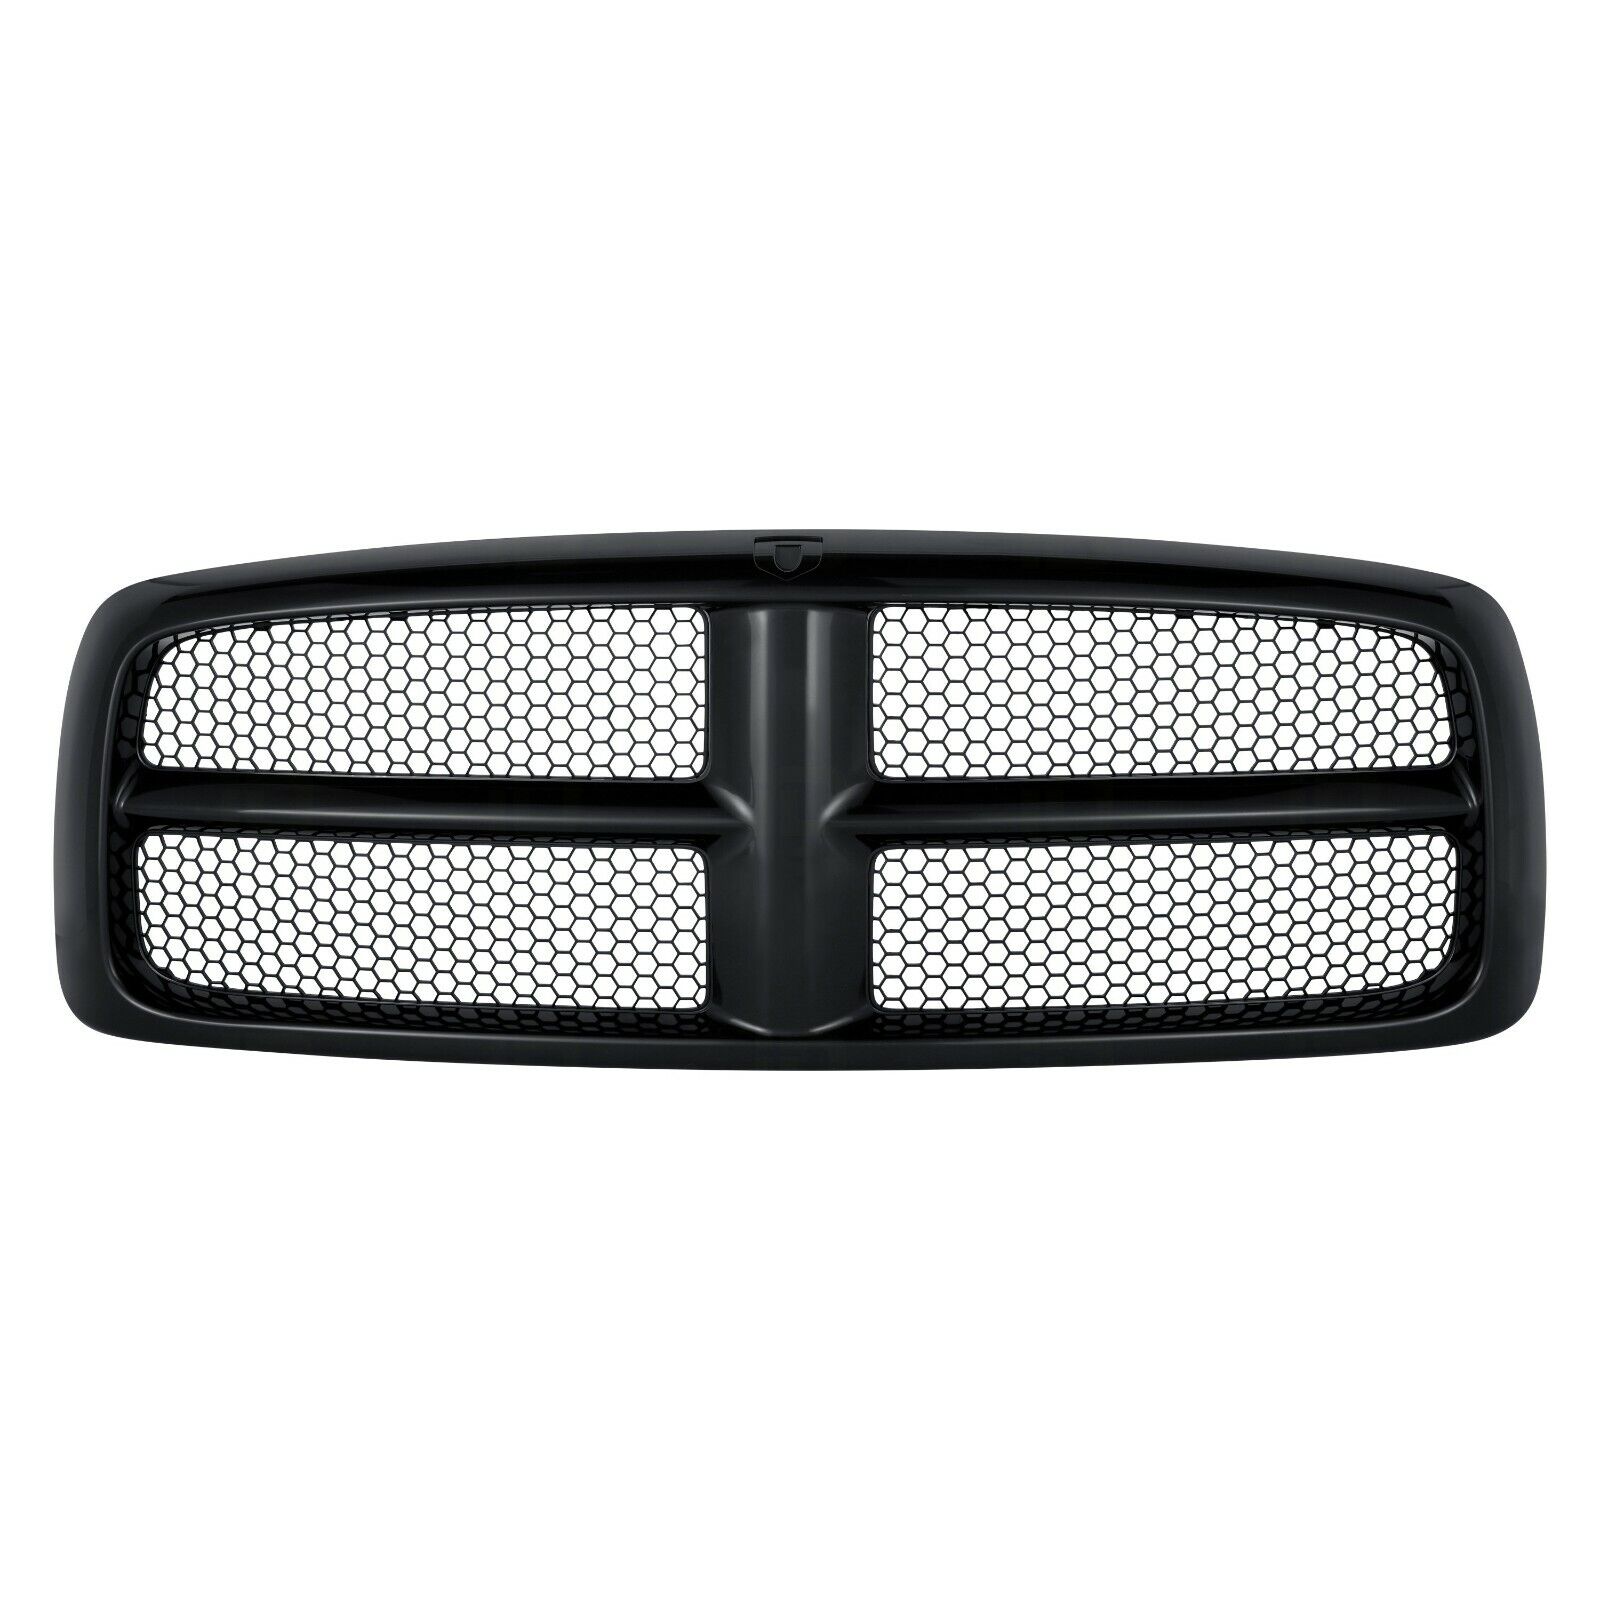 NEW Black Honeycomb Grille For 2002-2005 Dodge Ram SHIPS TODAY